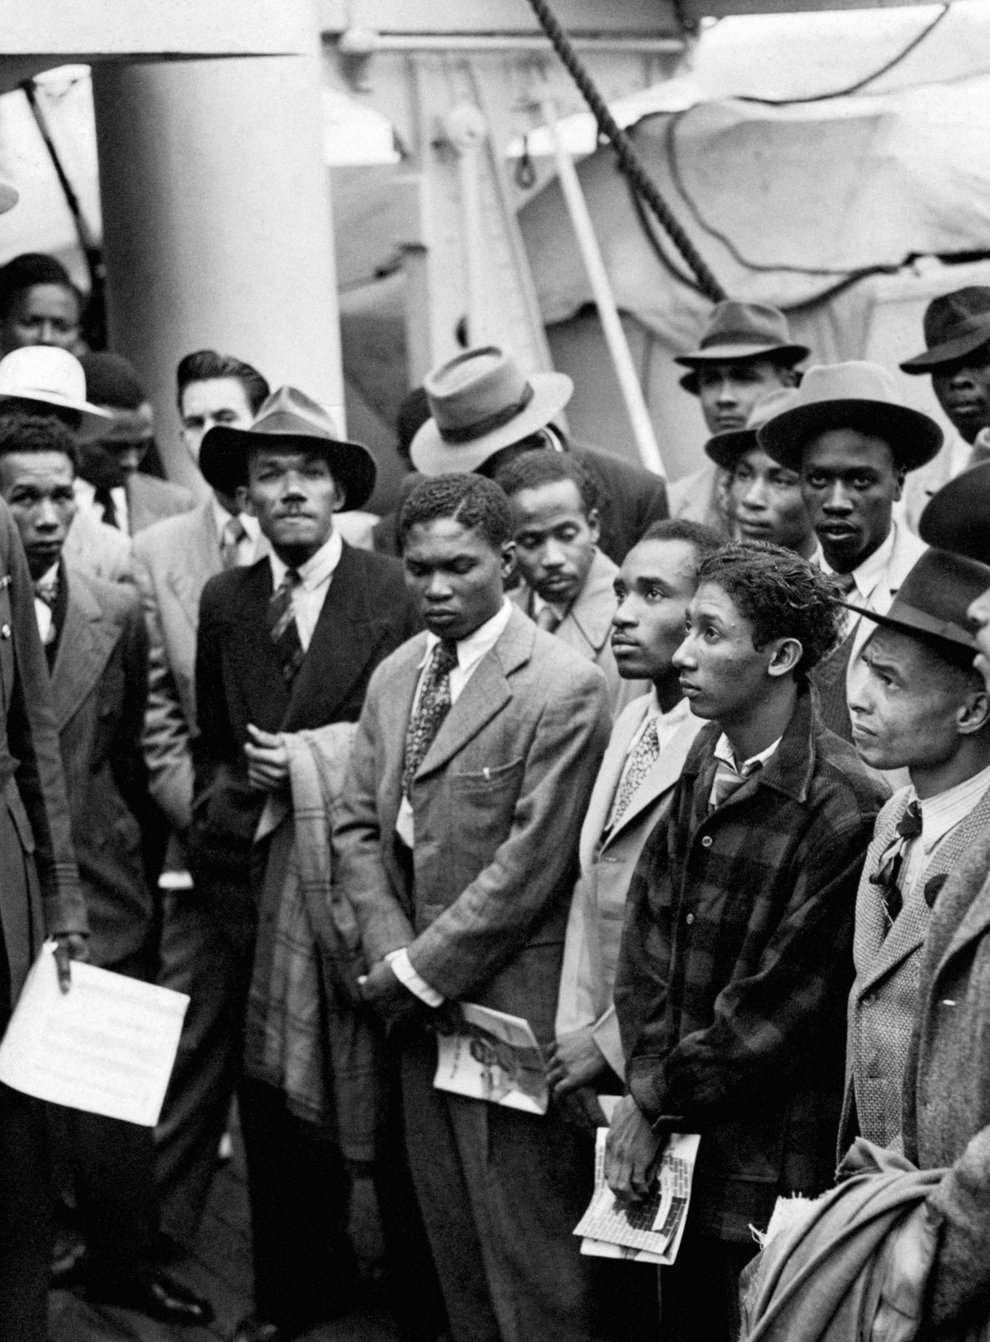 Jamaican immigrants arriving at Tilbury on the Empire Windrush